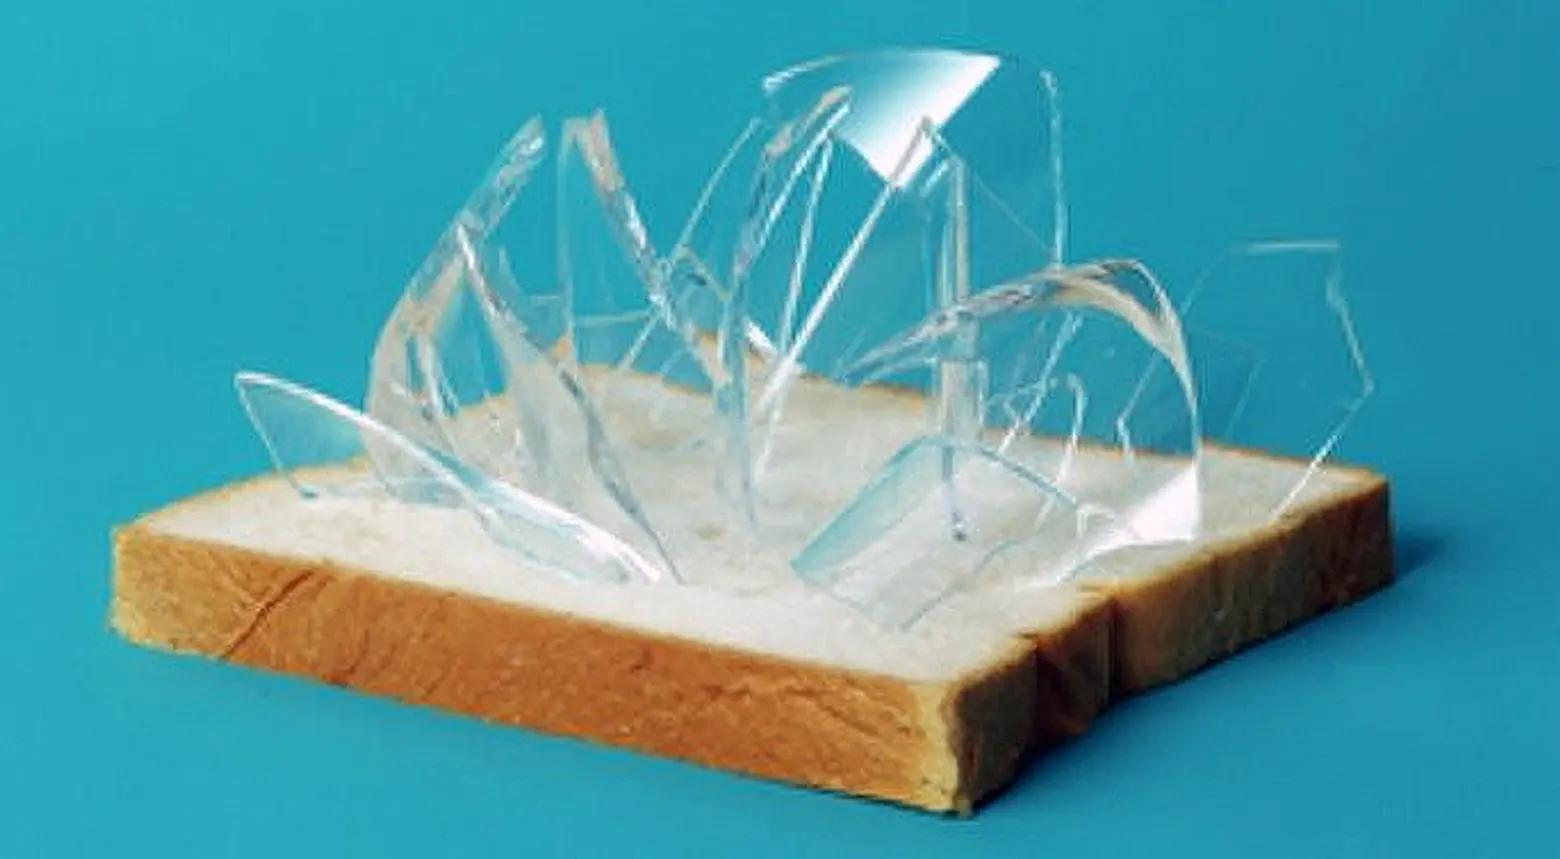 use bread to pick up glass